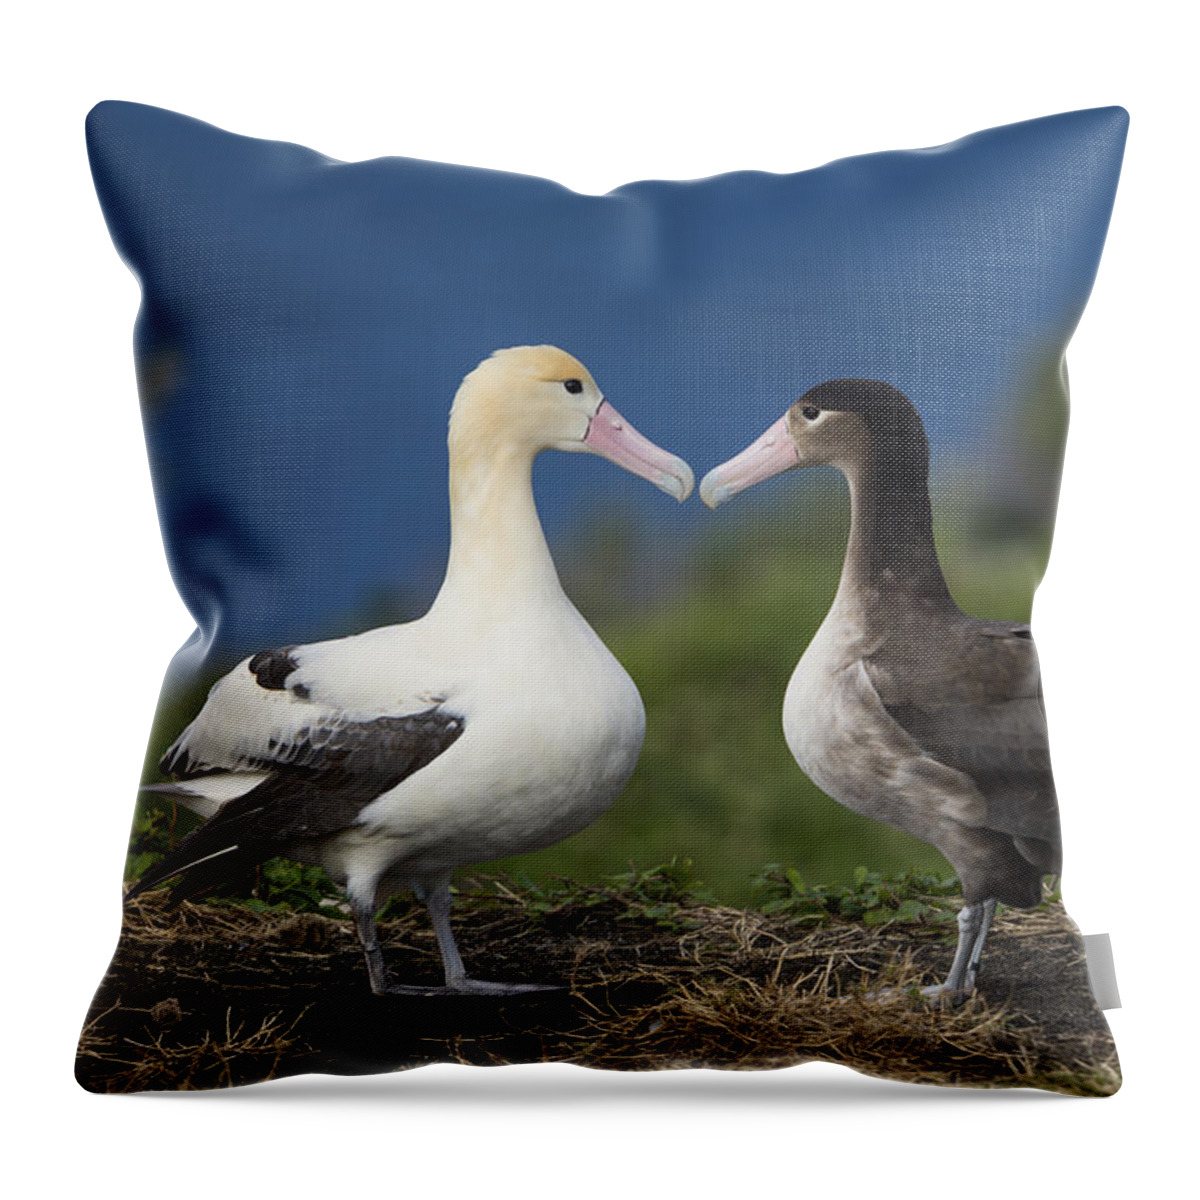 536835 Throw Pillow featuring the photograph Short-tailed Albatross Courting #1 by Tui De Roy